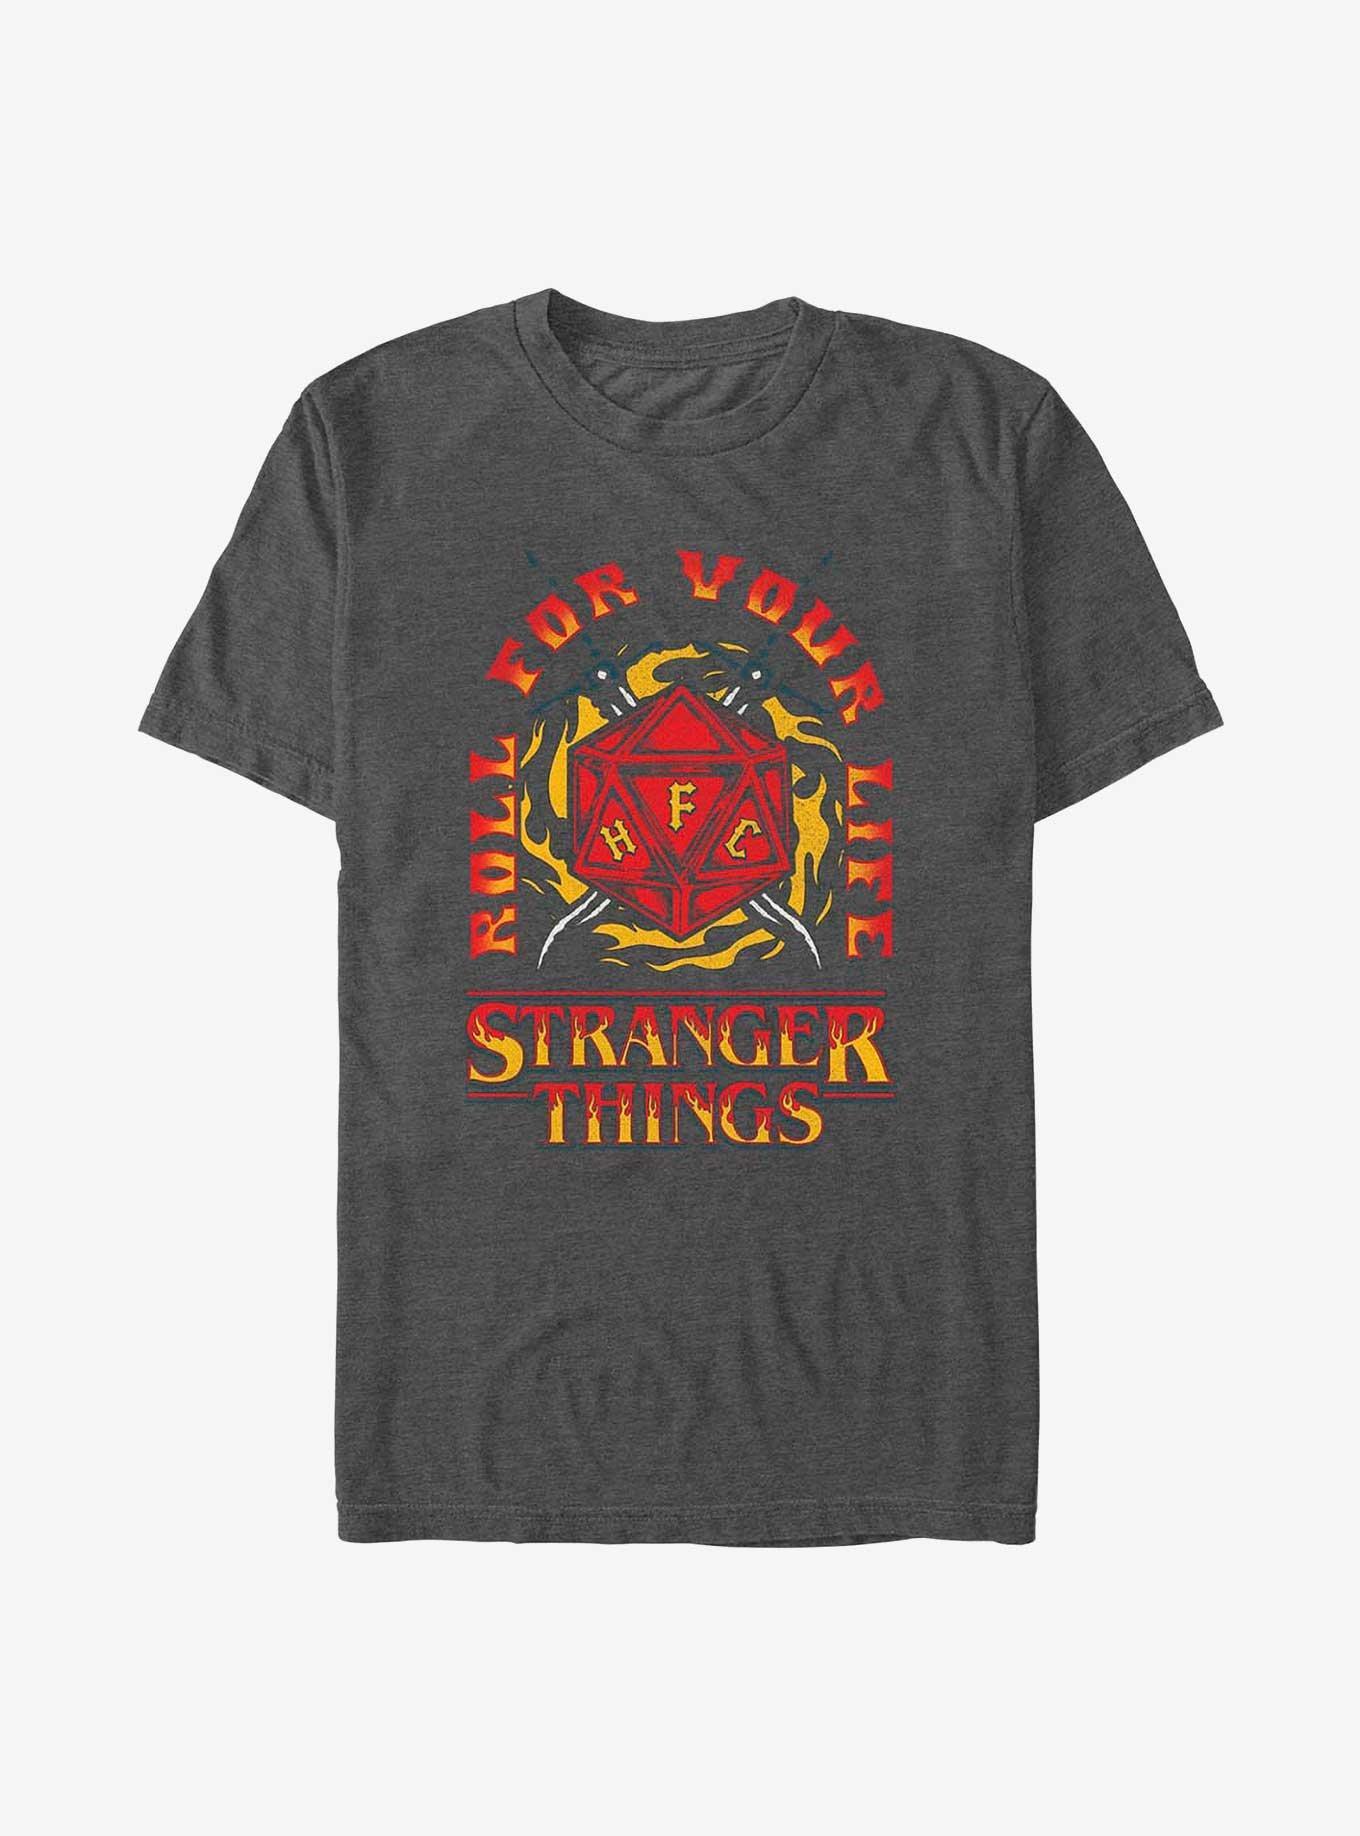 Stranger Things Fire and Dice T-Shirt, CHAR HTR, hi-res